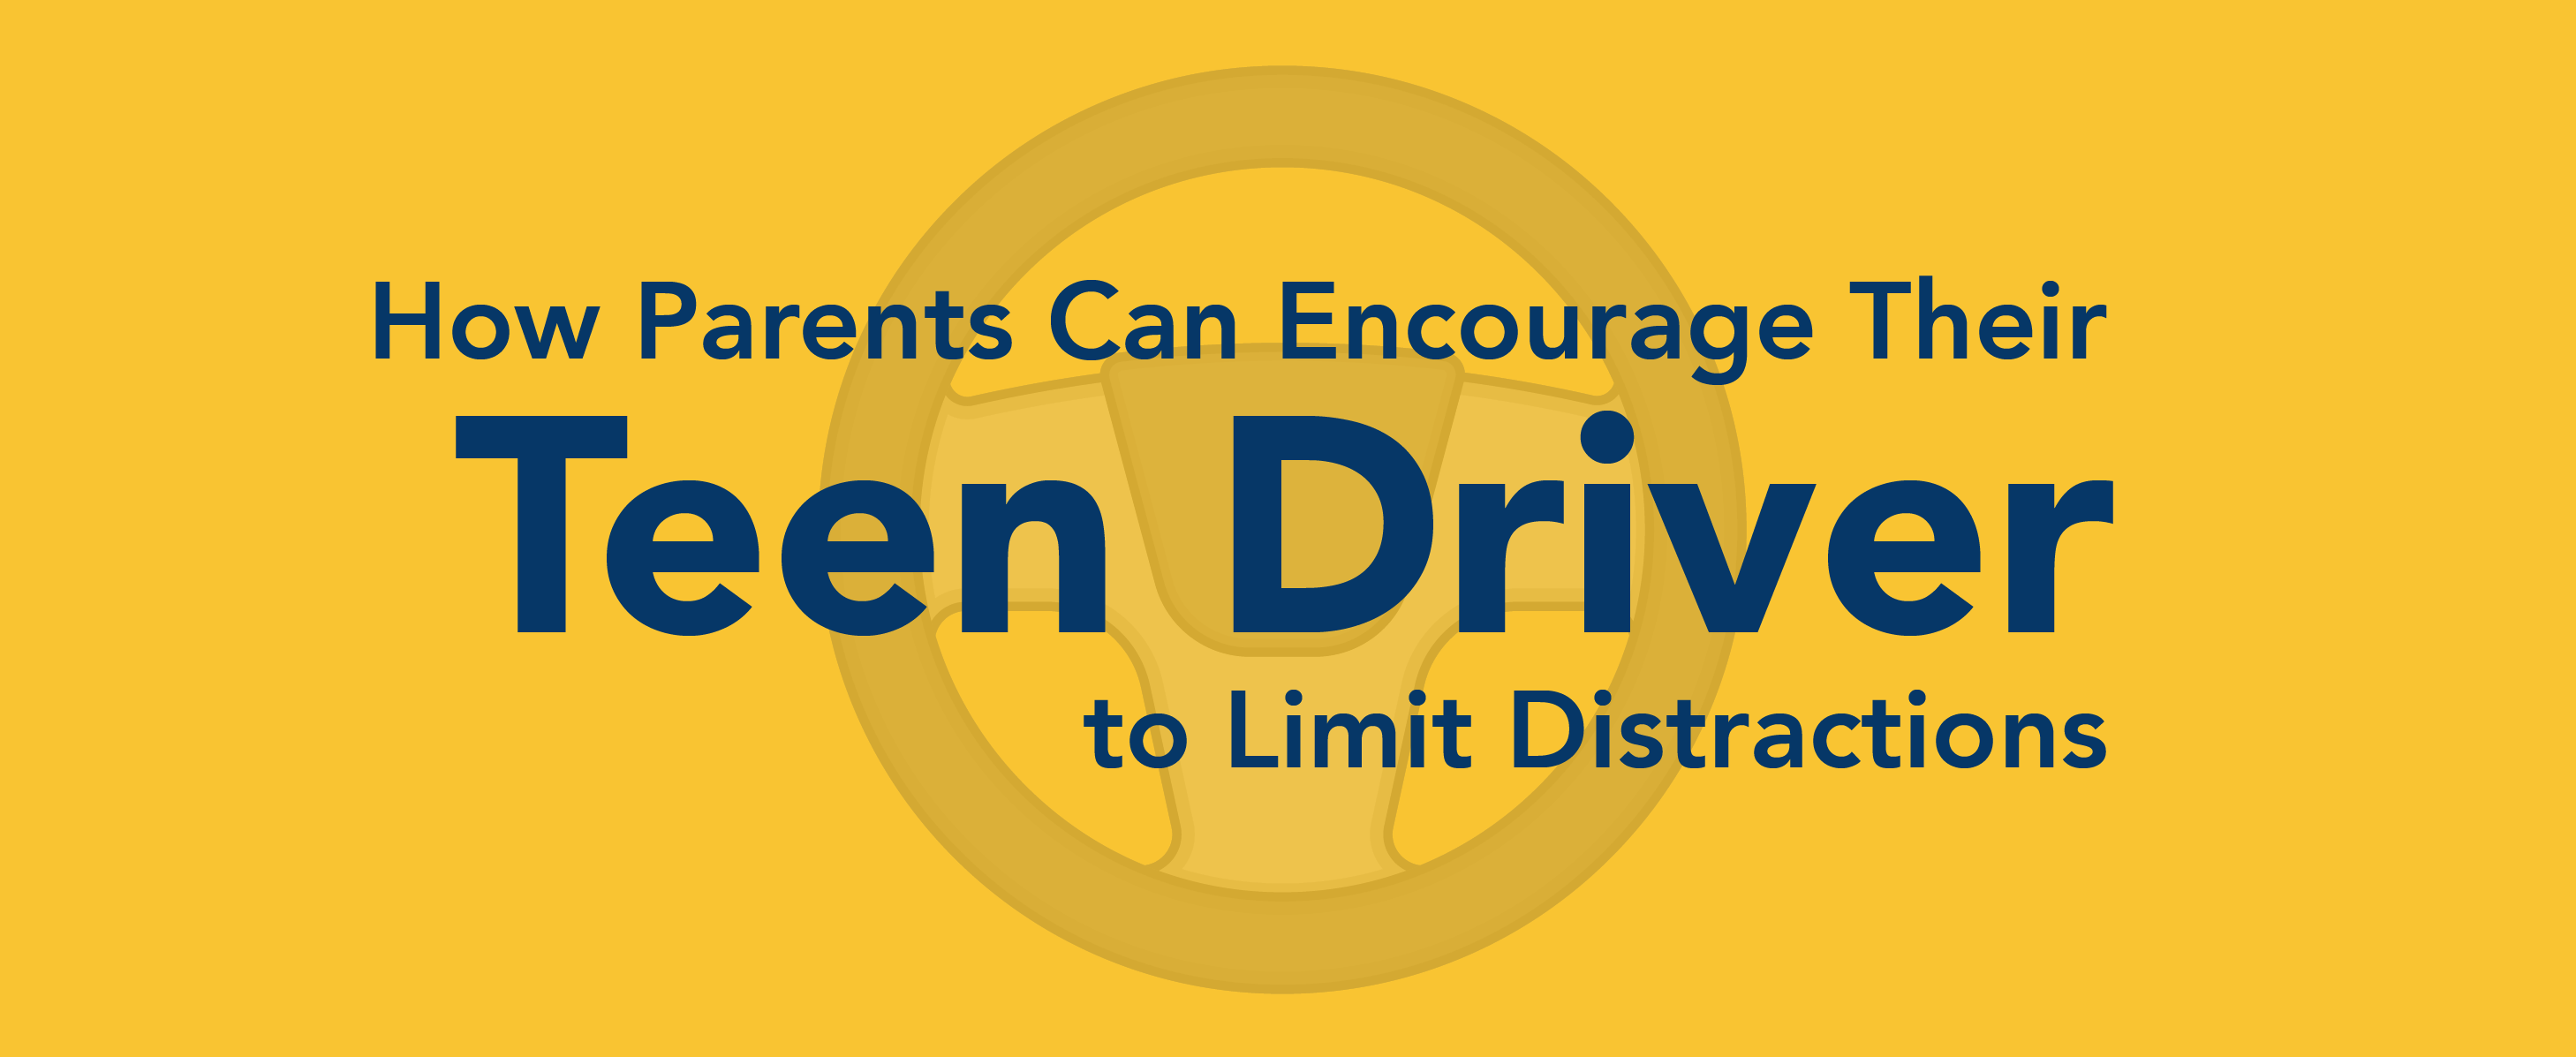 How parents can encourage their teen driver to limit distractions.